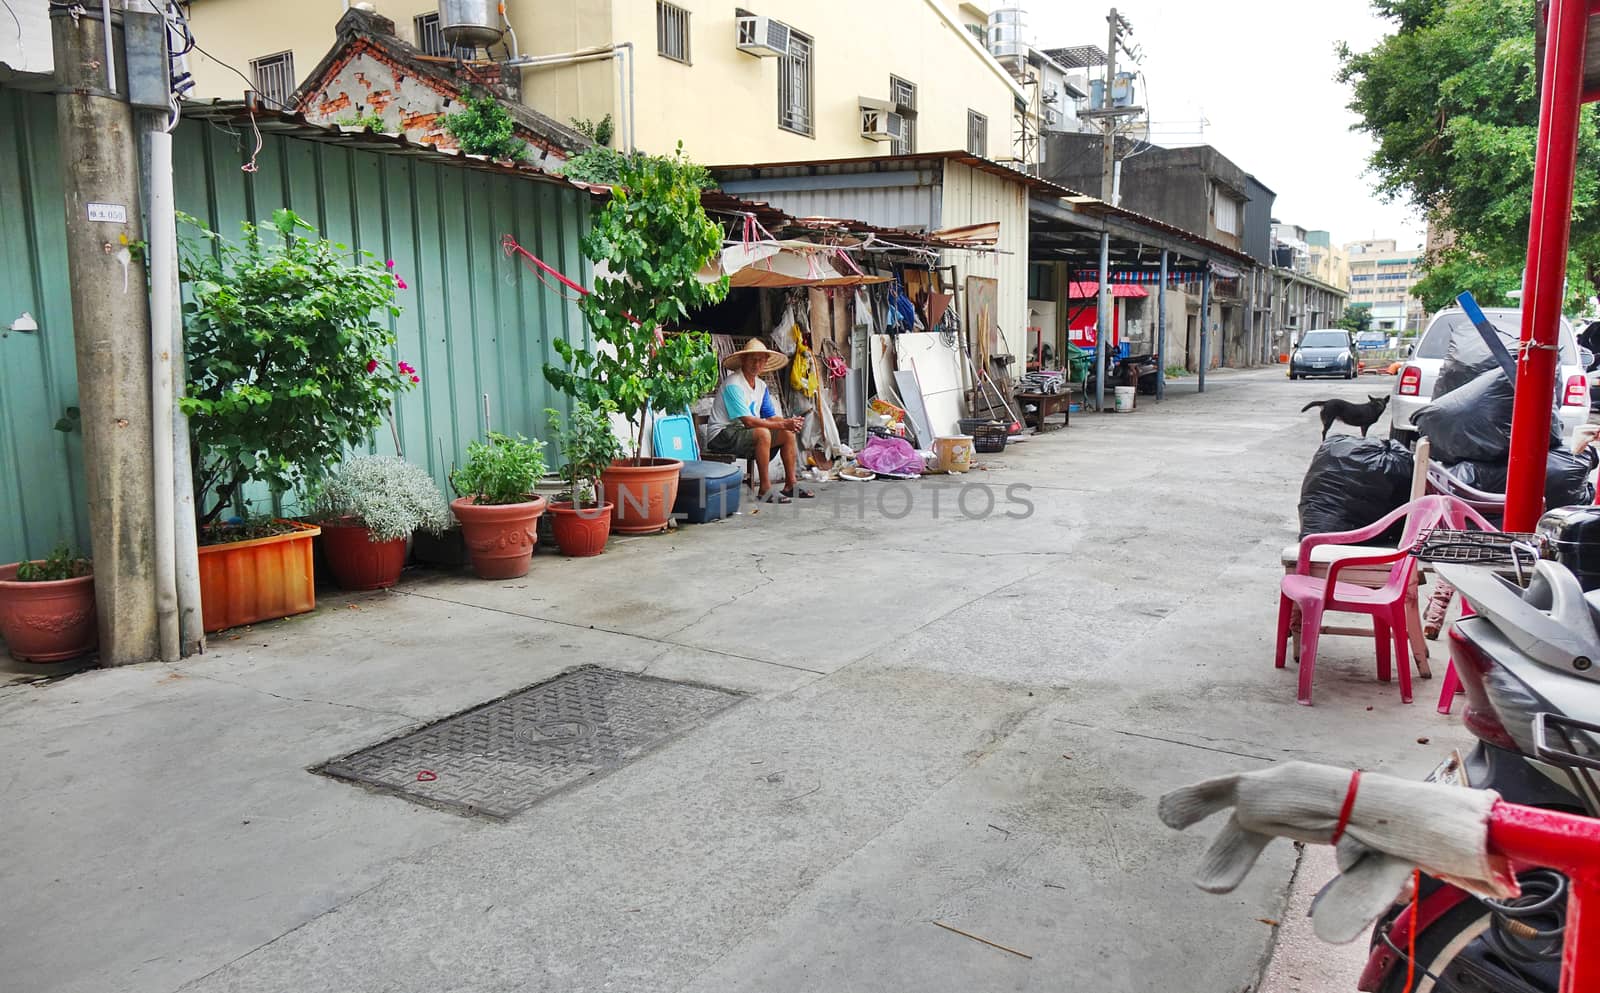 KAOHSIUNG, TAIWAN -- JULY 17, 2017: A quiet back street in one of the traditional neighborhoods of the city.